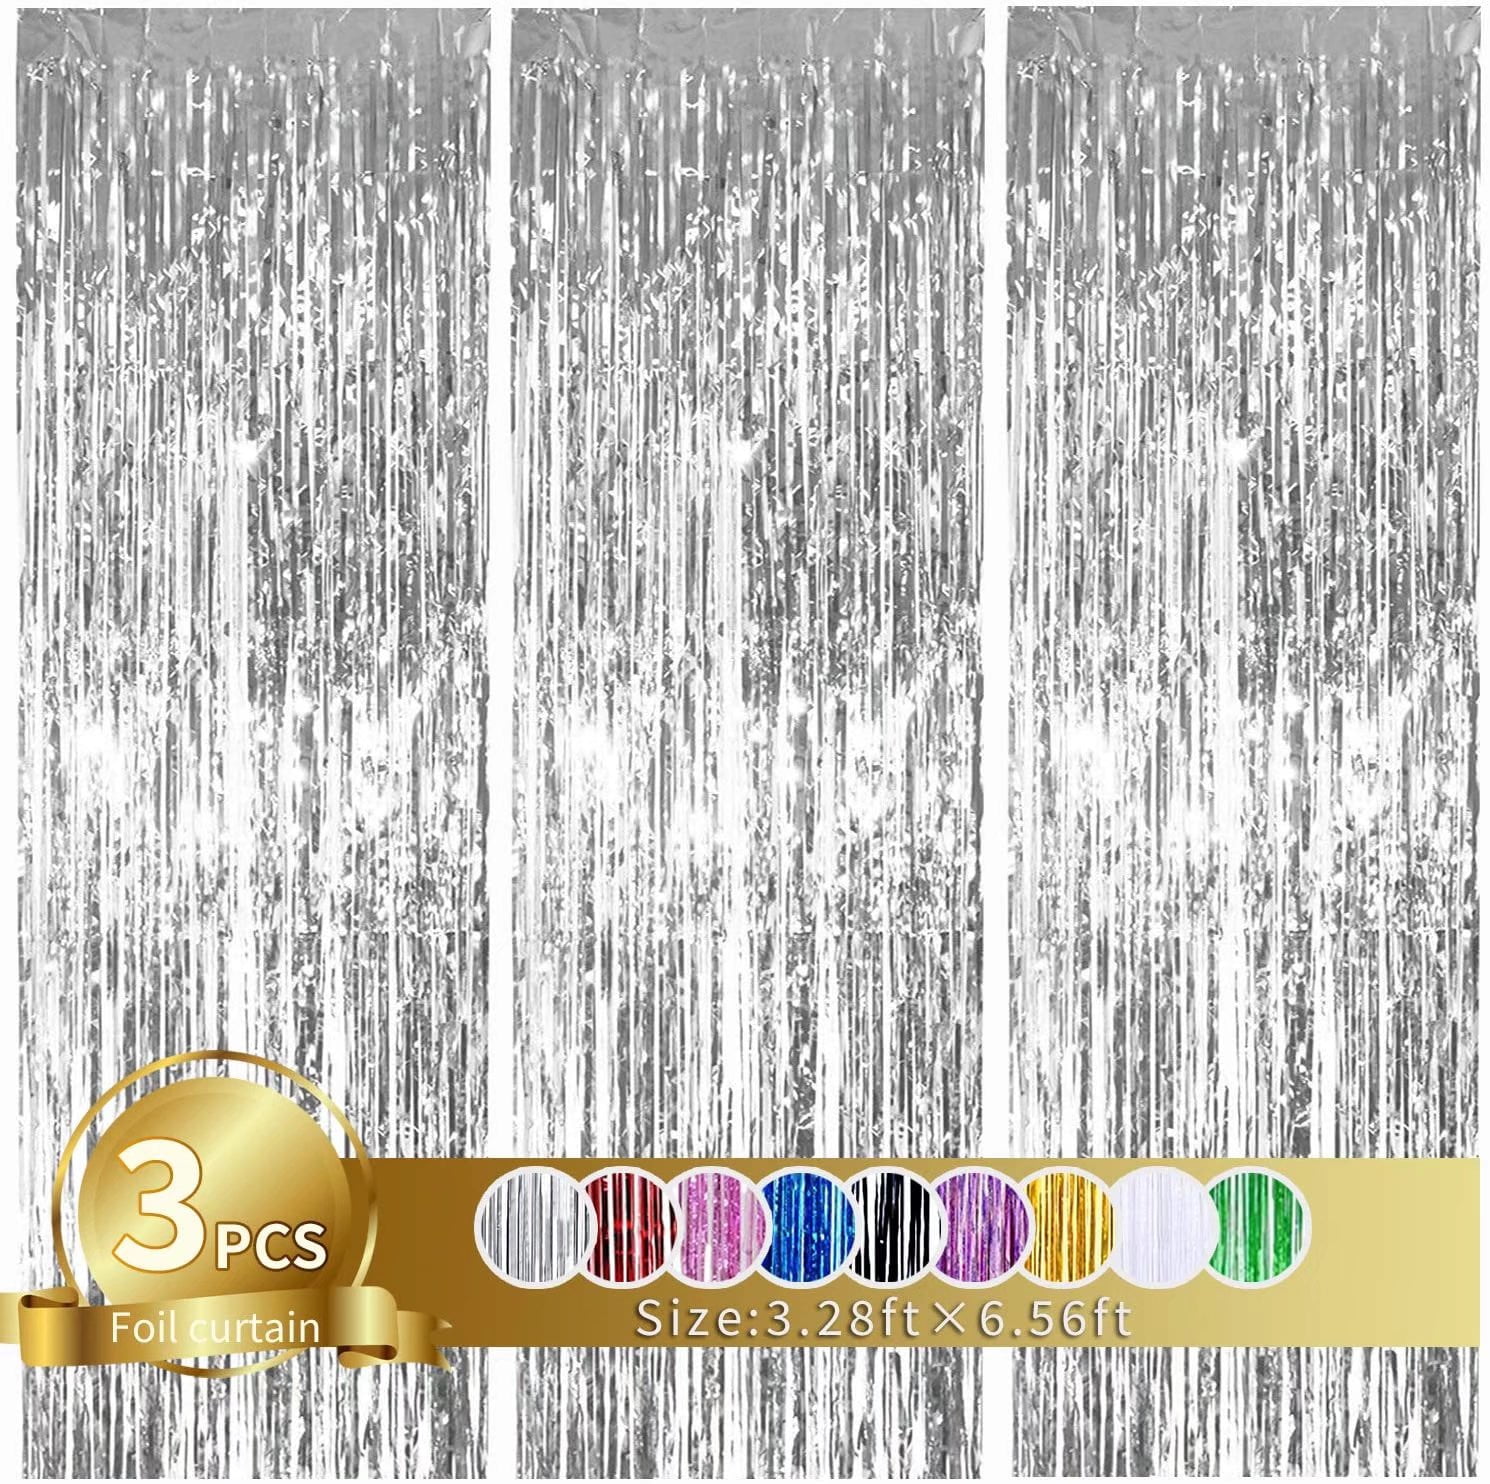 3.28ft x 6.56ft Black Photo Booth Backdrop Streamer Curtain,Photo Booth Props,Ideal Bachelorette Party Supplies,Birthday,Christmas,New Year Decor 2 Pcs Black Metallic Tinsel Foil Fringe Curtains